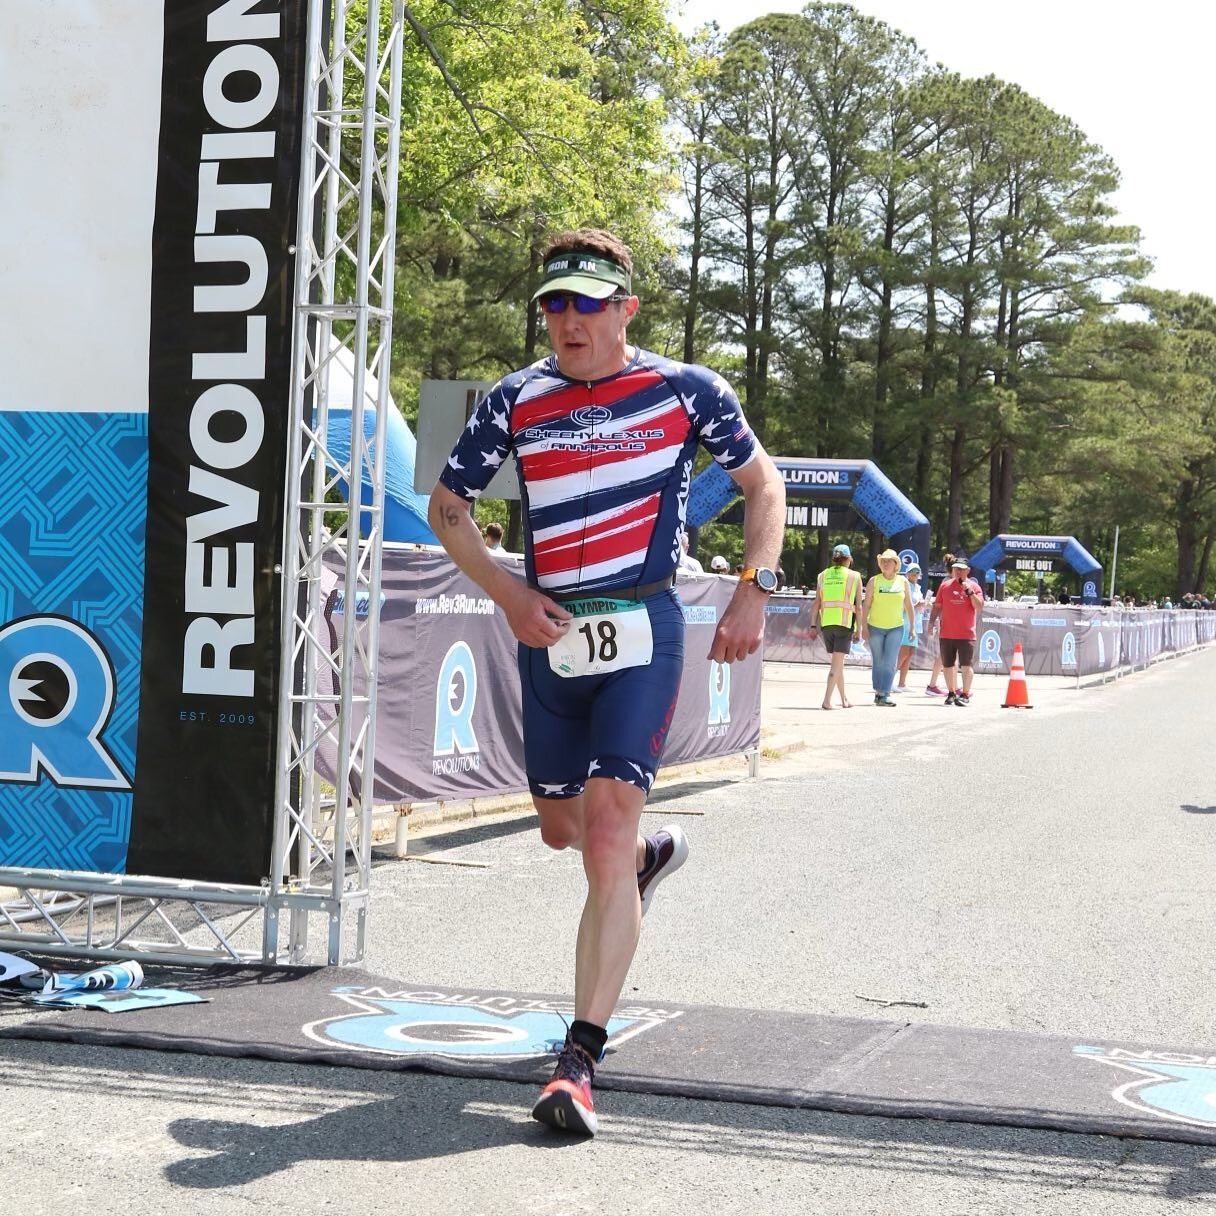 After running 3:00 at the B&amp;A Trail Marathon in March, we knew @brian.hetherington.35 would have limited availability for workouts through June due to work commitments. With Eagleman 70.3 on the horizon, we opted to sharpen up our multisport fitn